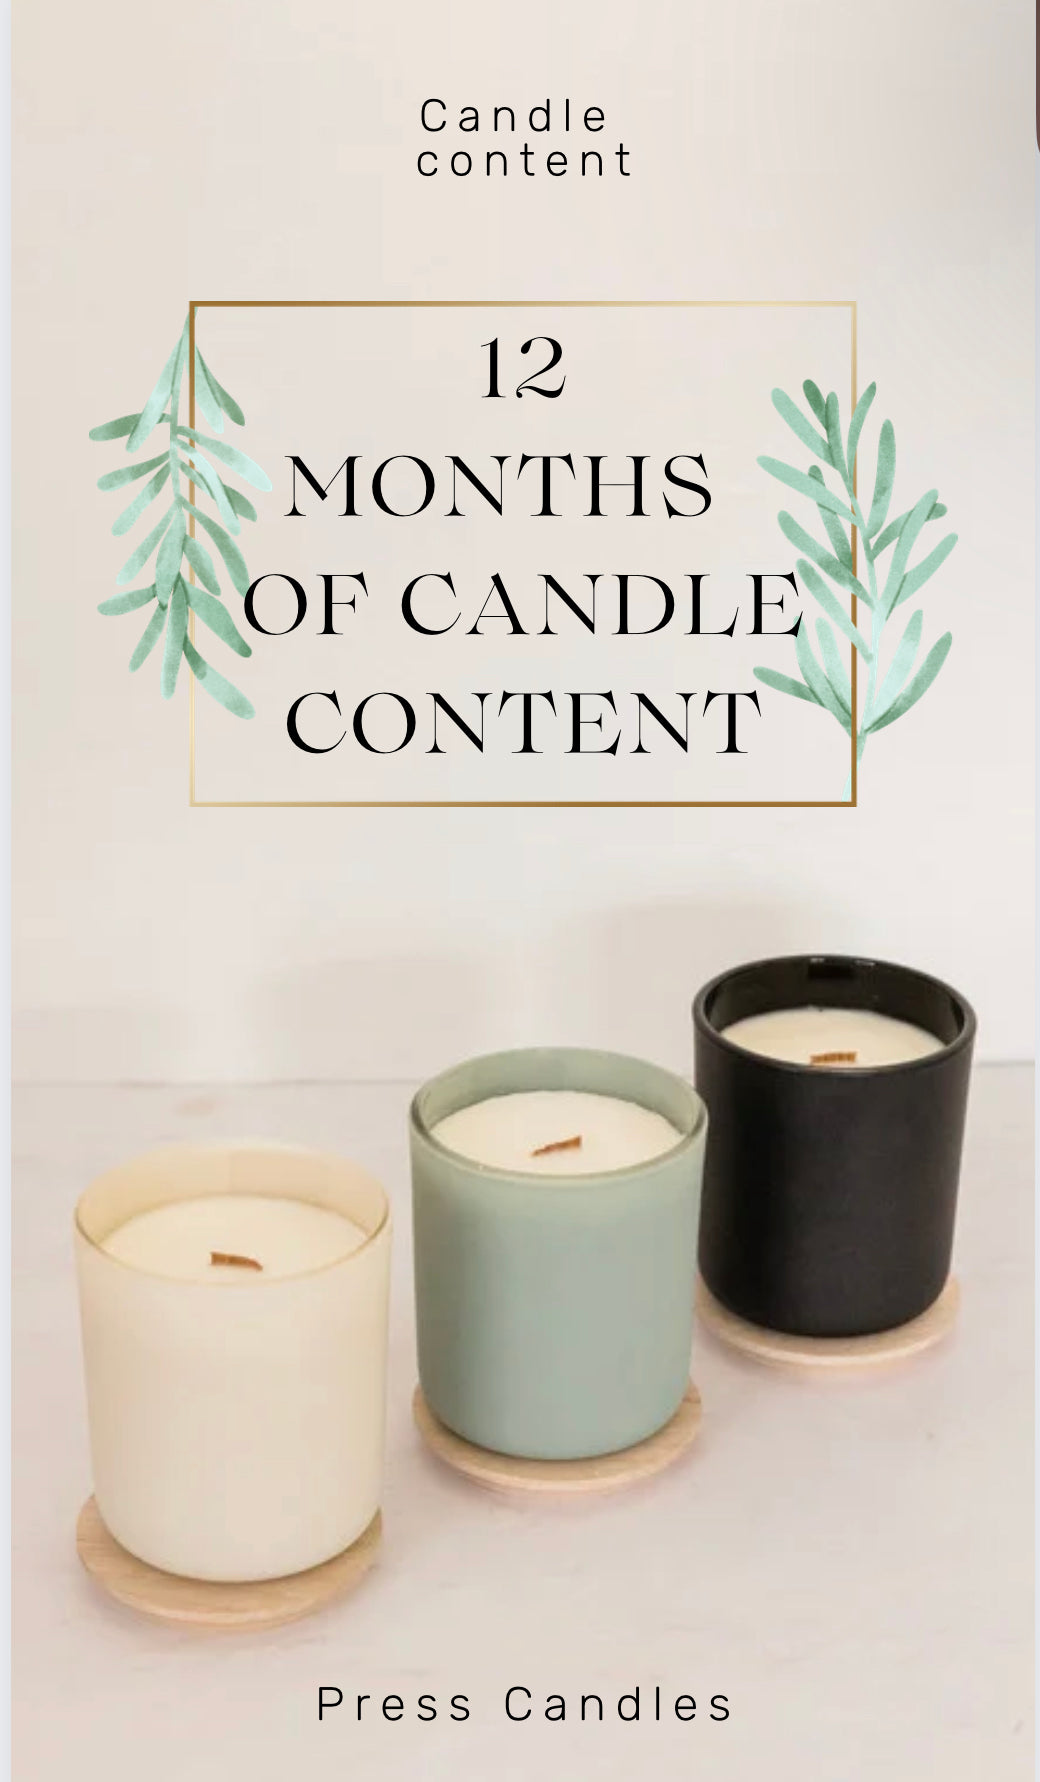 12 months of candle content (please be sure to add your email at check out to receive the Item)